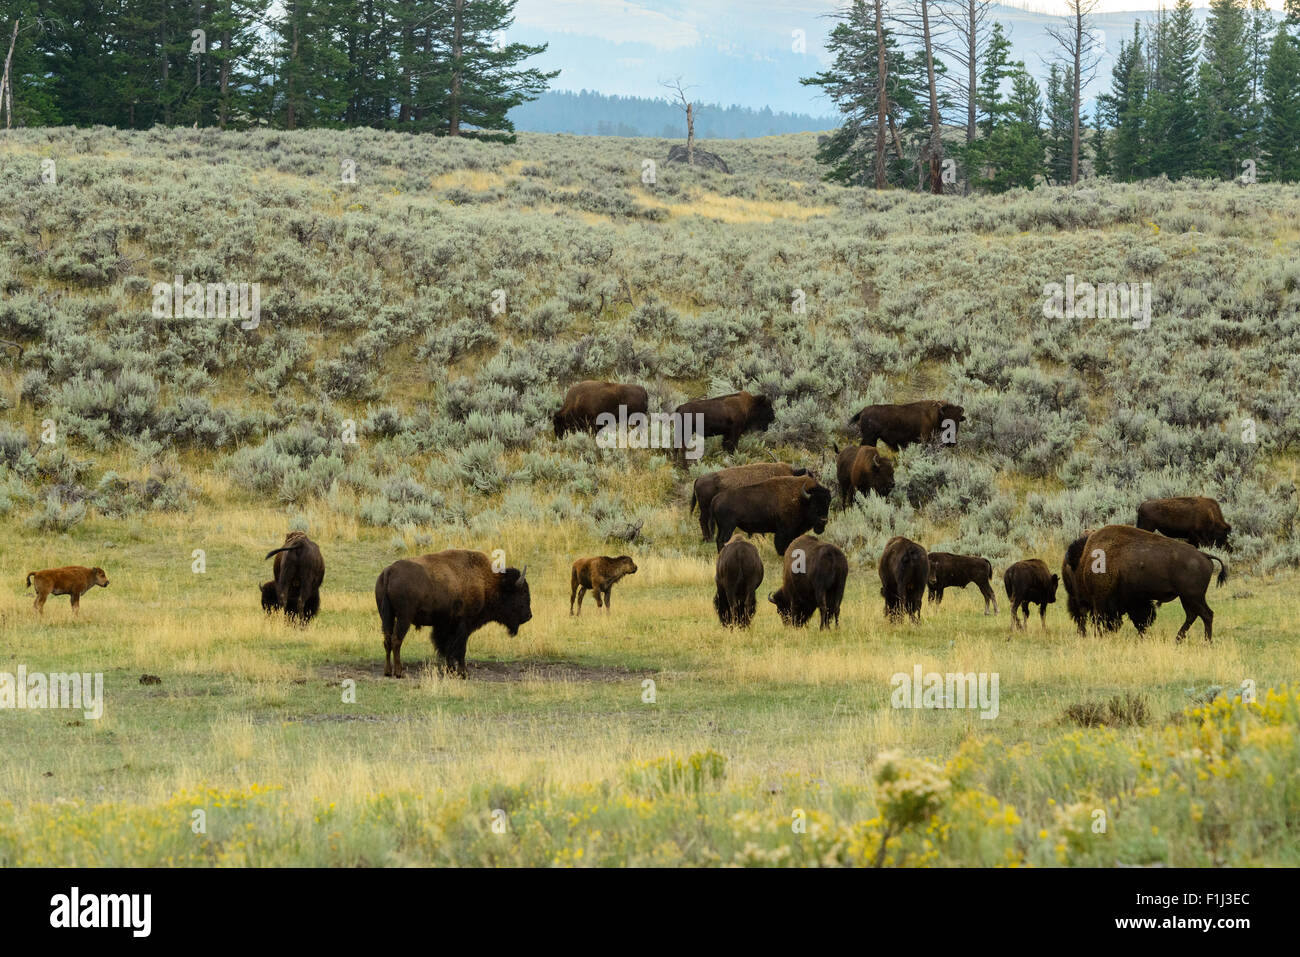 Images of the buffalo herd from Hayden Valley, in Yellowstone National Park, WY. Stock Photo